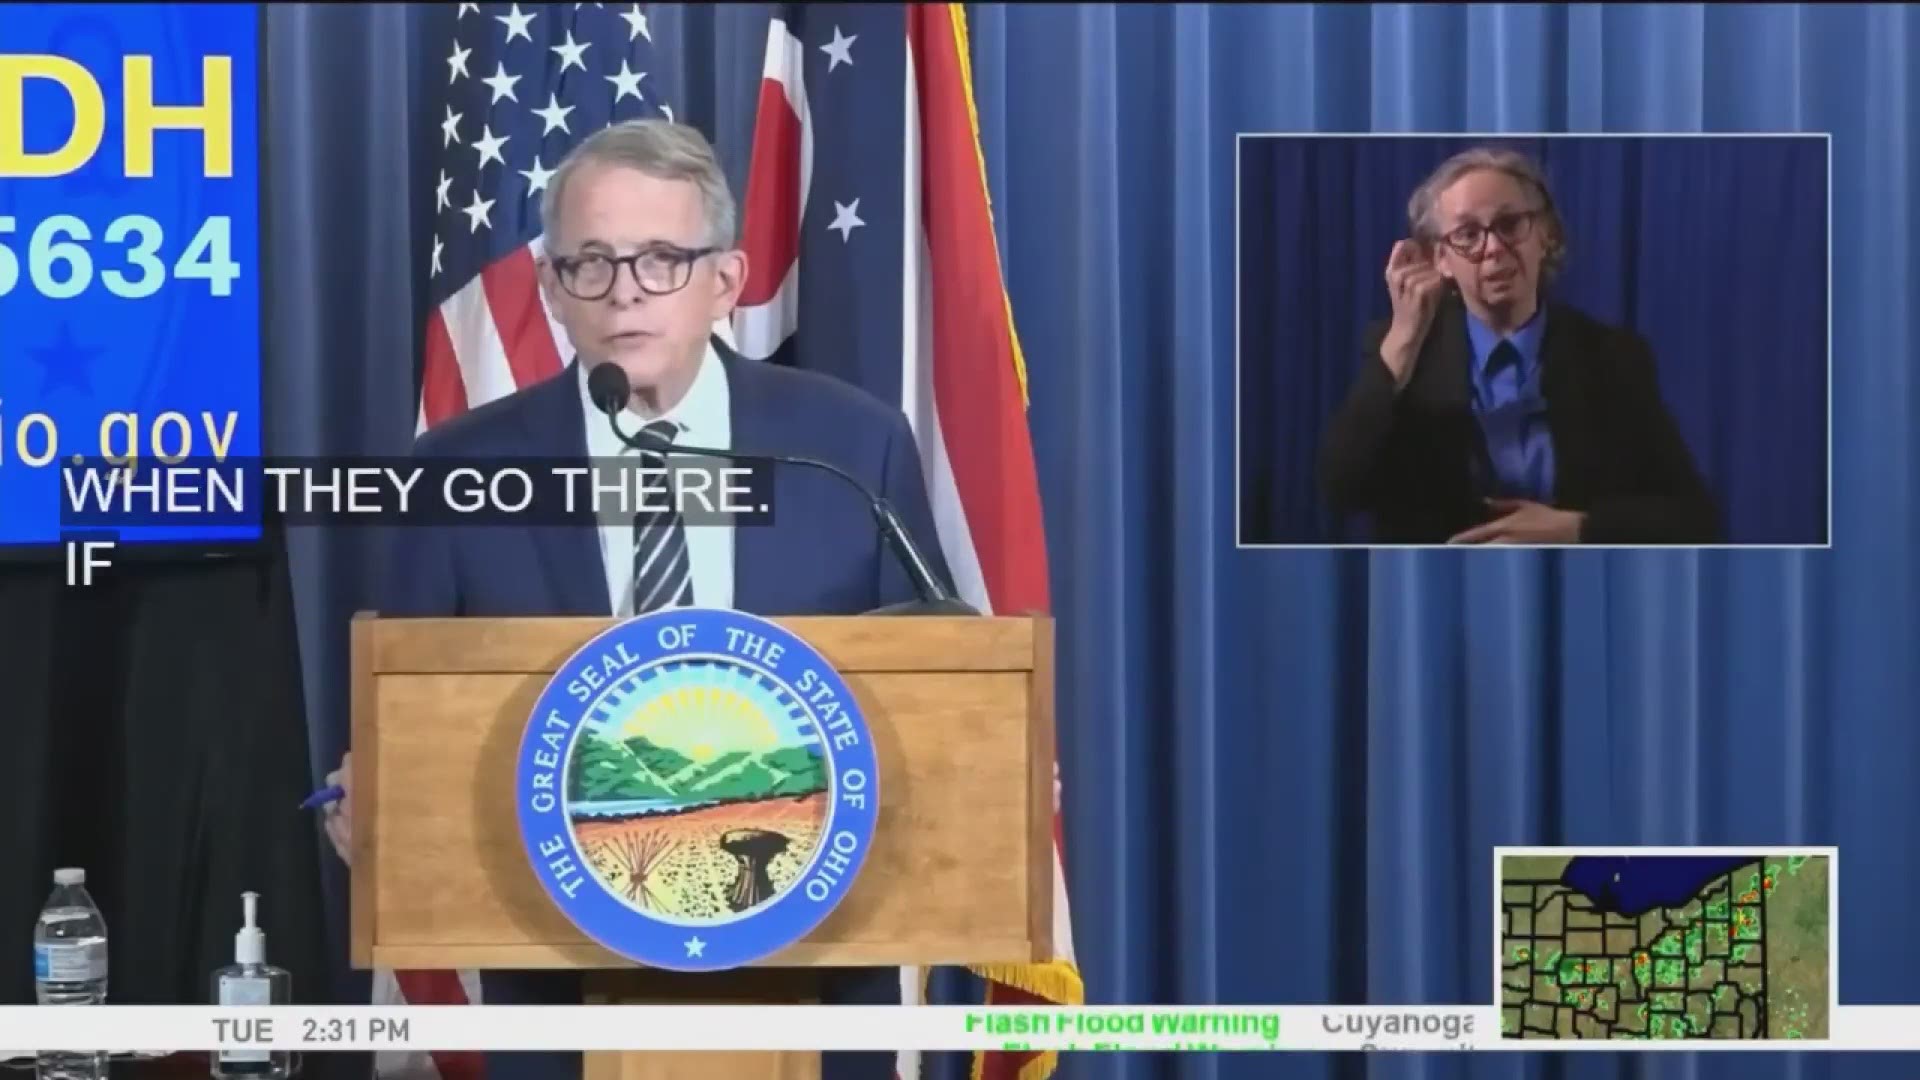 ‘You may want to think twice about going to those states,’ Gov. DeWine said of Ohioans traveling to COVID-19 hot spots.